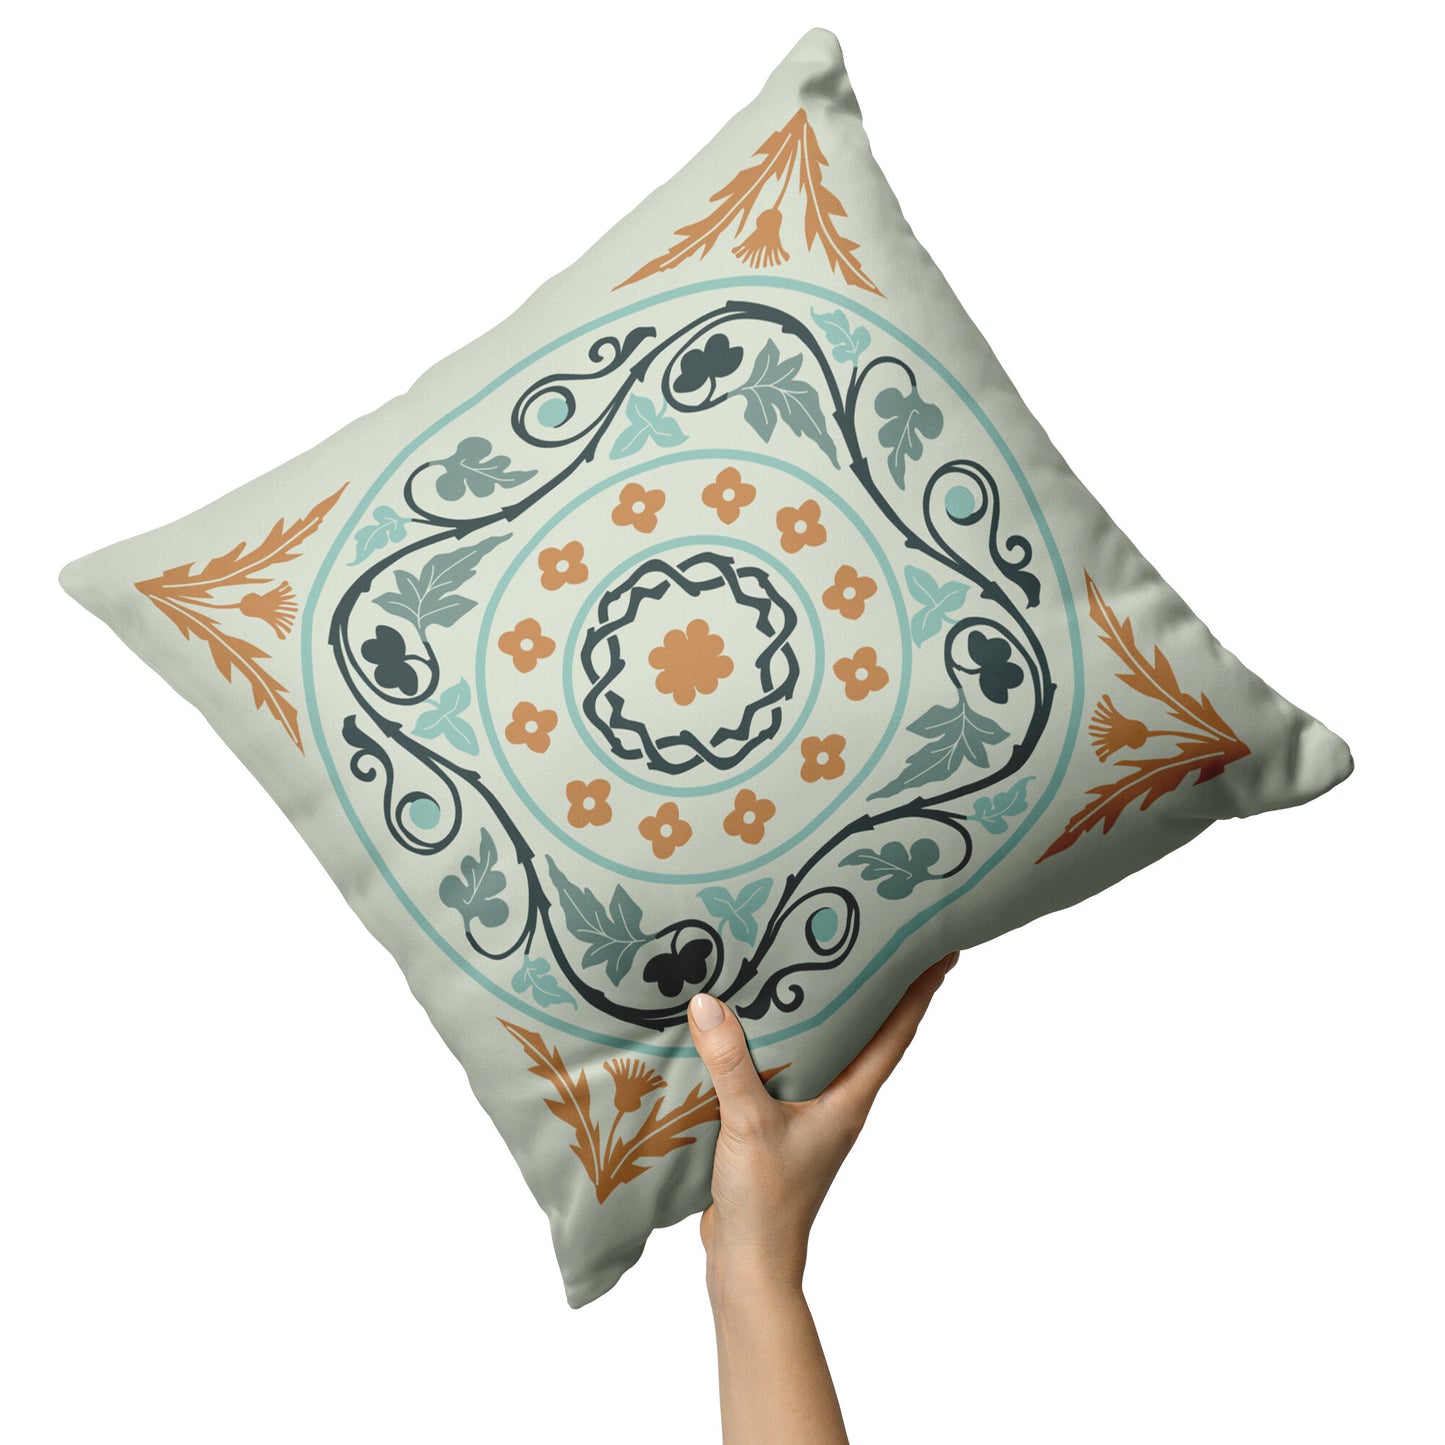 Green and Gold Medieval Inspired Pillows